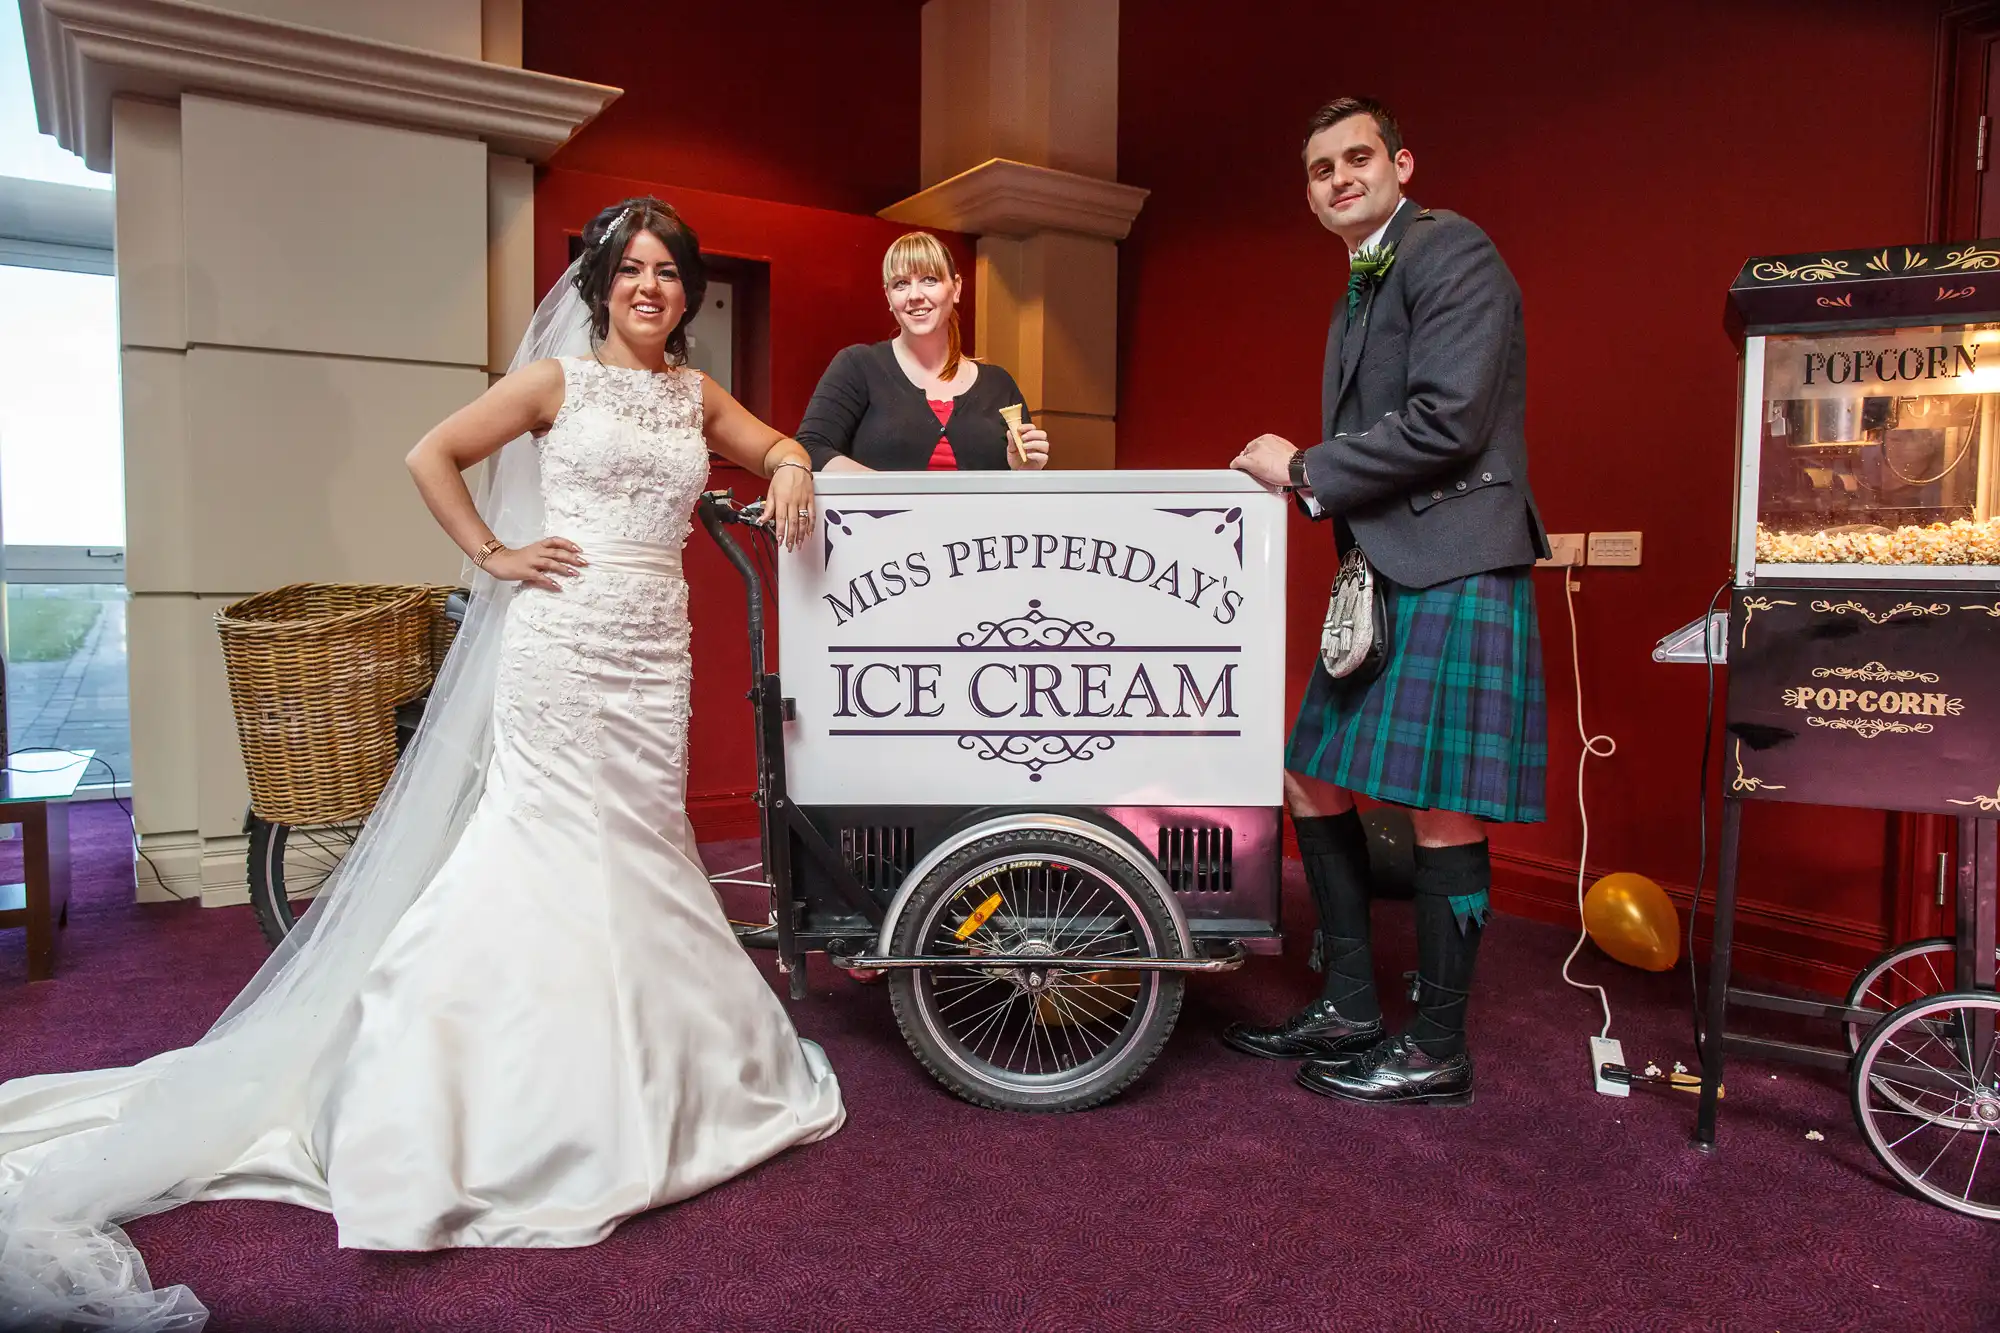 A bride and groom stand with a woman serving ice cream from a vintage cart at a wedding reception.